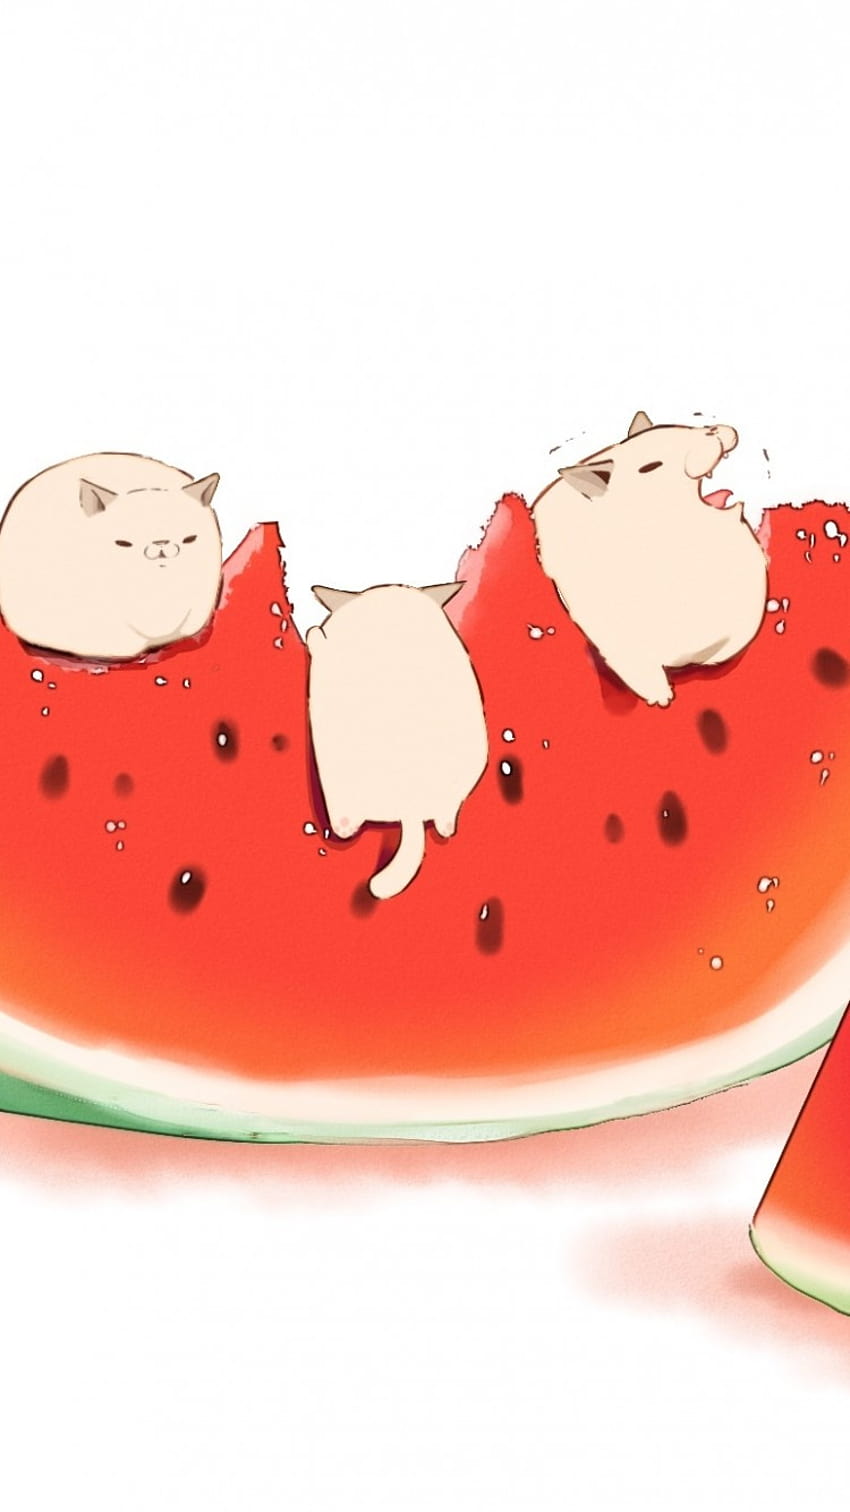 Eat Watermelon PNG Image, Universal Summer Eating Watermelon Characters,  Universal Summer, Crayon Character, Summer PNG Image For Free Download